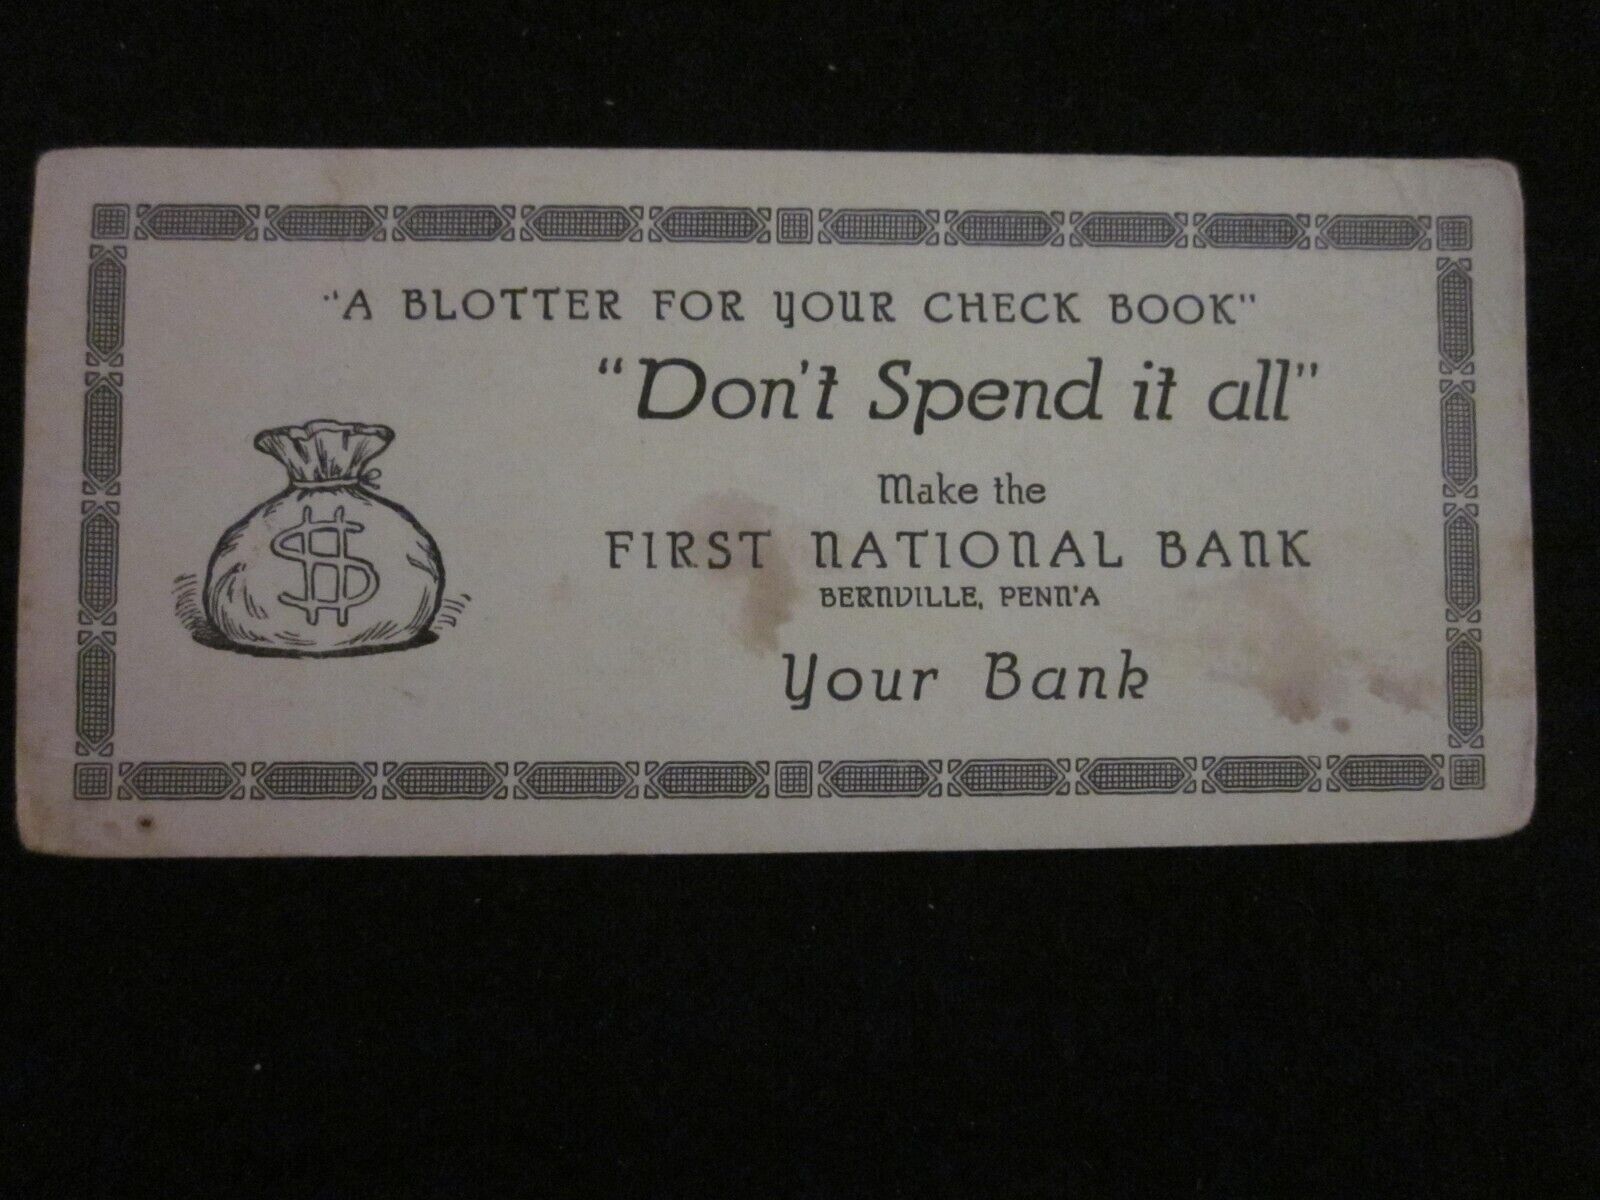 Vintage Bernville PA First National Bank Check Book Blotter- Don\'t spend it all